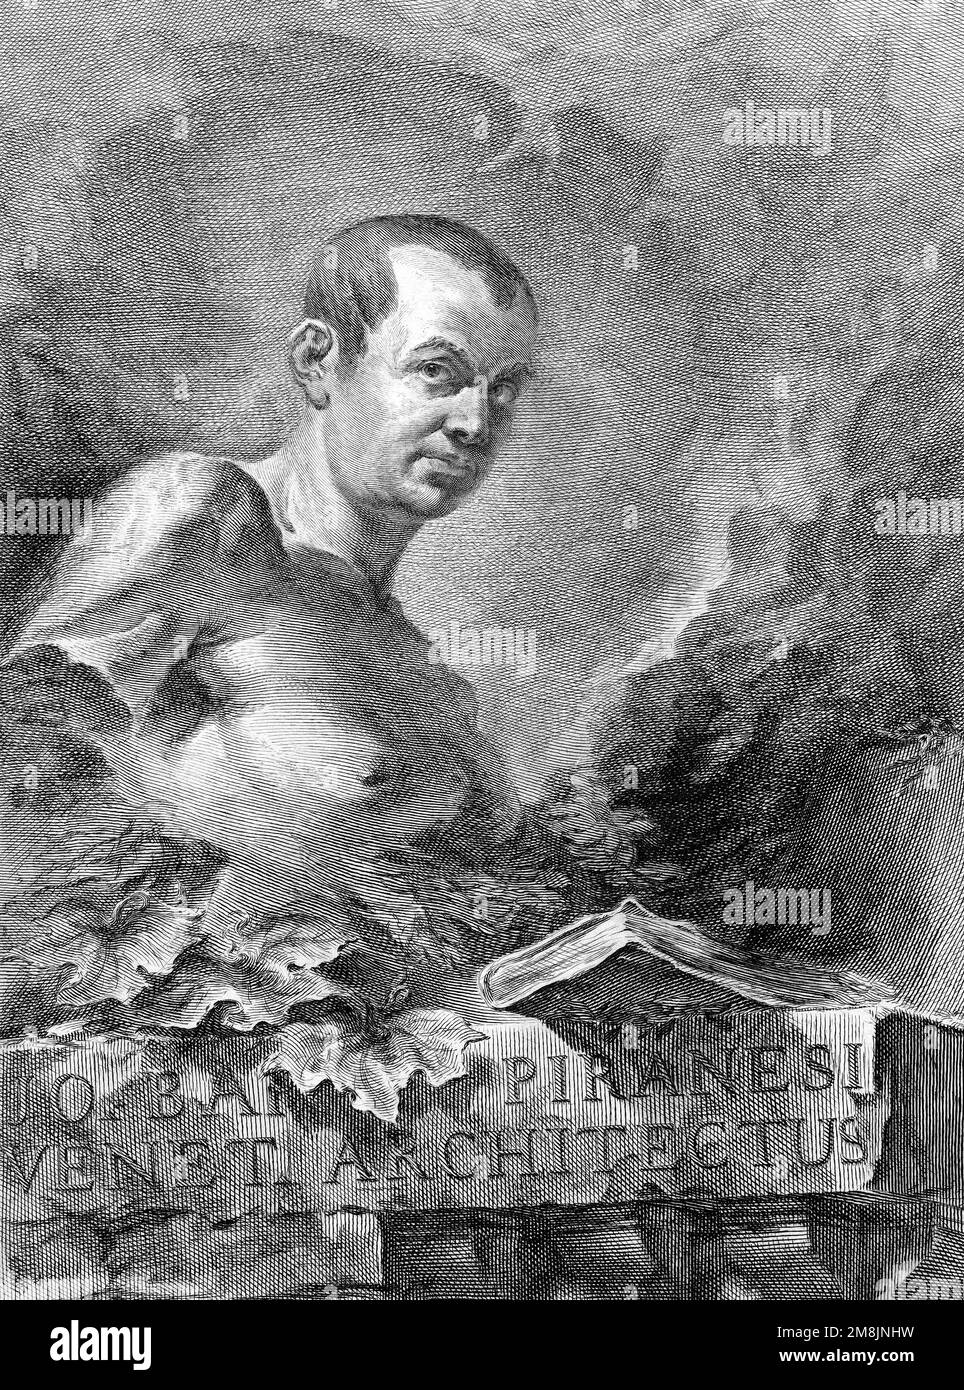 Piranesi (1720-1728). Engraving entitled 'Portrait of G.B. Piranesi in imitation of an antique bust, from Opere varie di Architettura, prospetive, grotteschi, antichità; inventate, ed incise da Giambattista Piranesi Architetto Veneziano (Various Works of Architecture, perspectives, grotesques, and antiquities, designed and etched by Giambattista Piranesi, Venetian Architect), by Felice Polanzani, 1750 Stock Photo